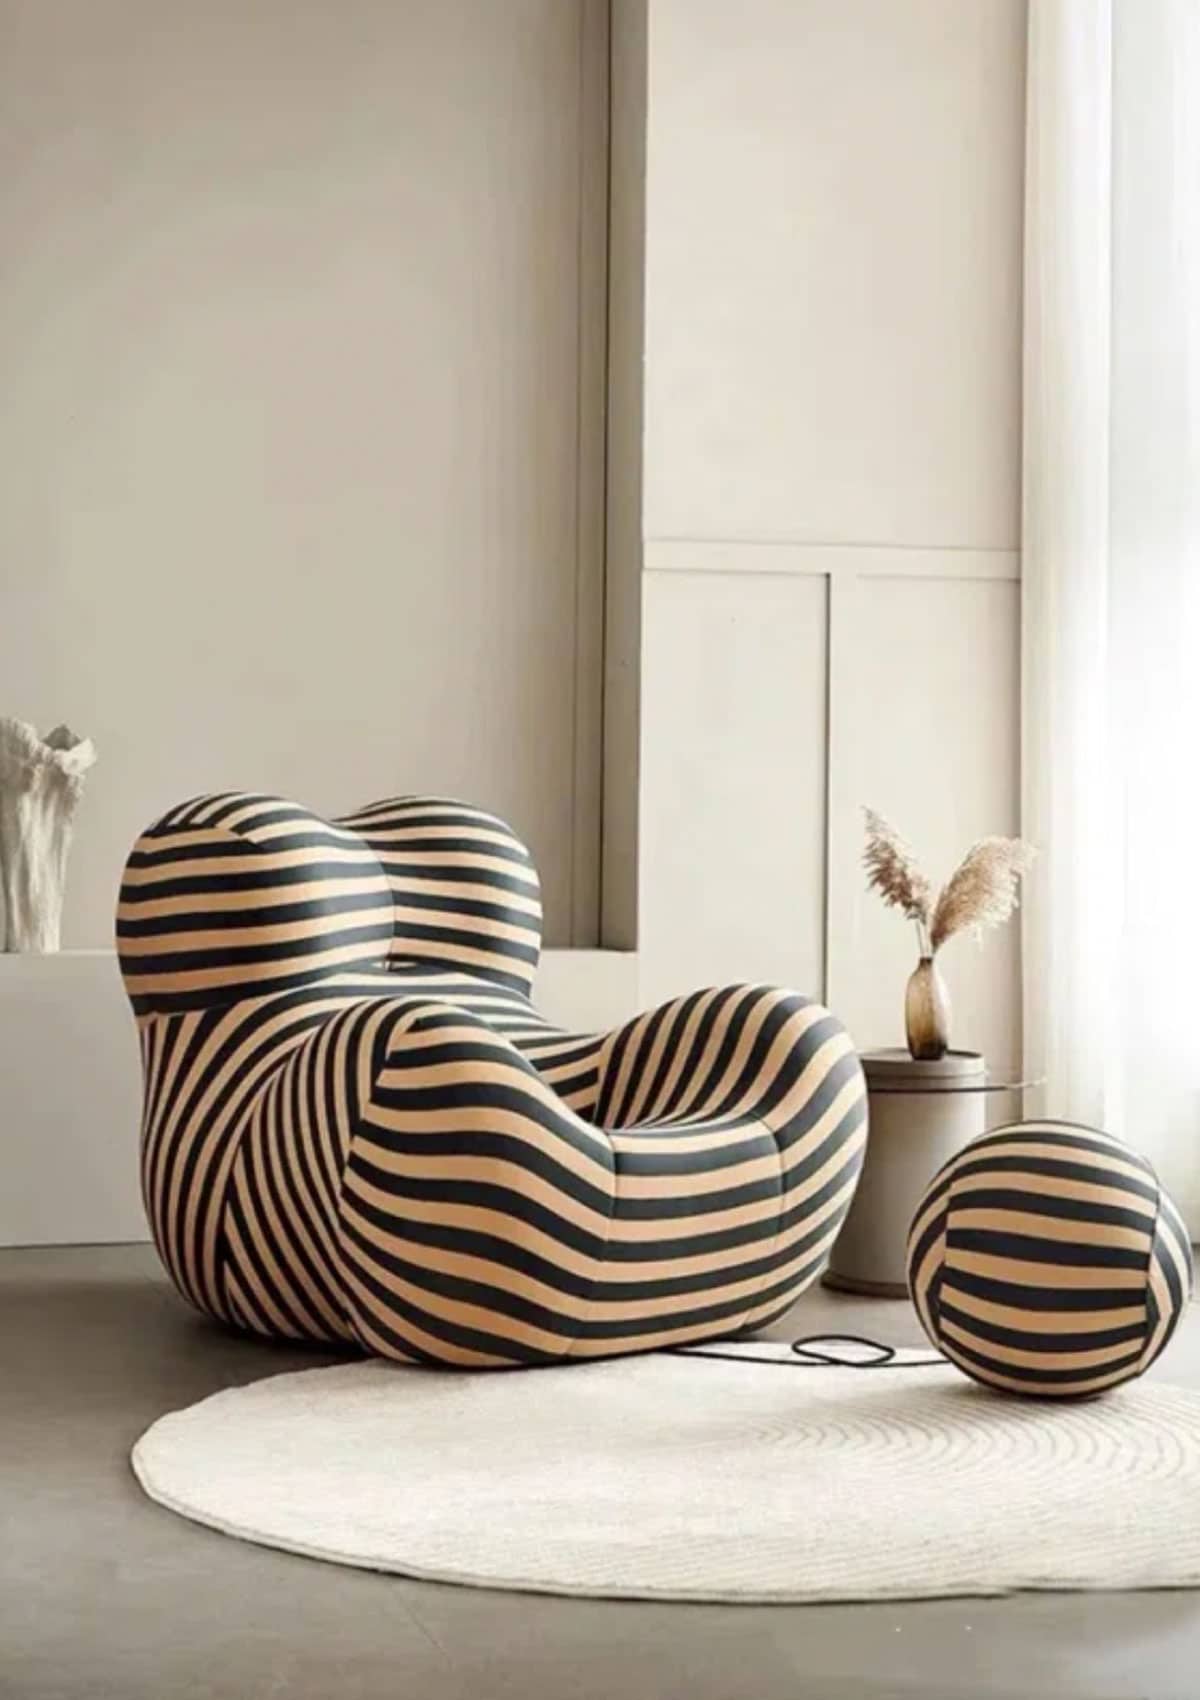 Modern Striped Chair with Ball Ottoman - Unique striped modern eclectic striped chair with ball shaped ottoman has a funky circus vibe.